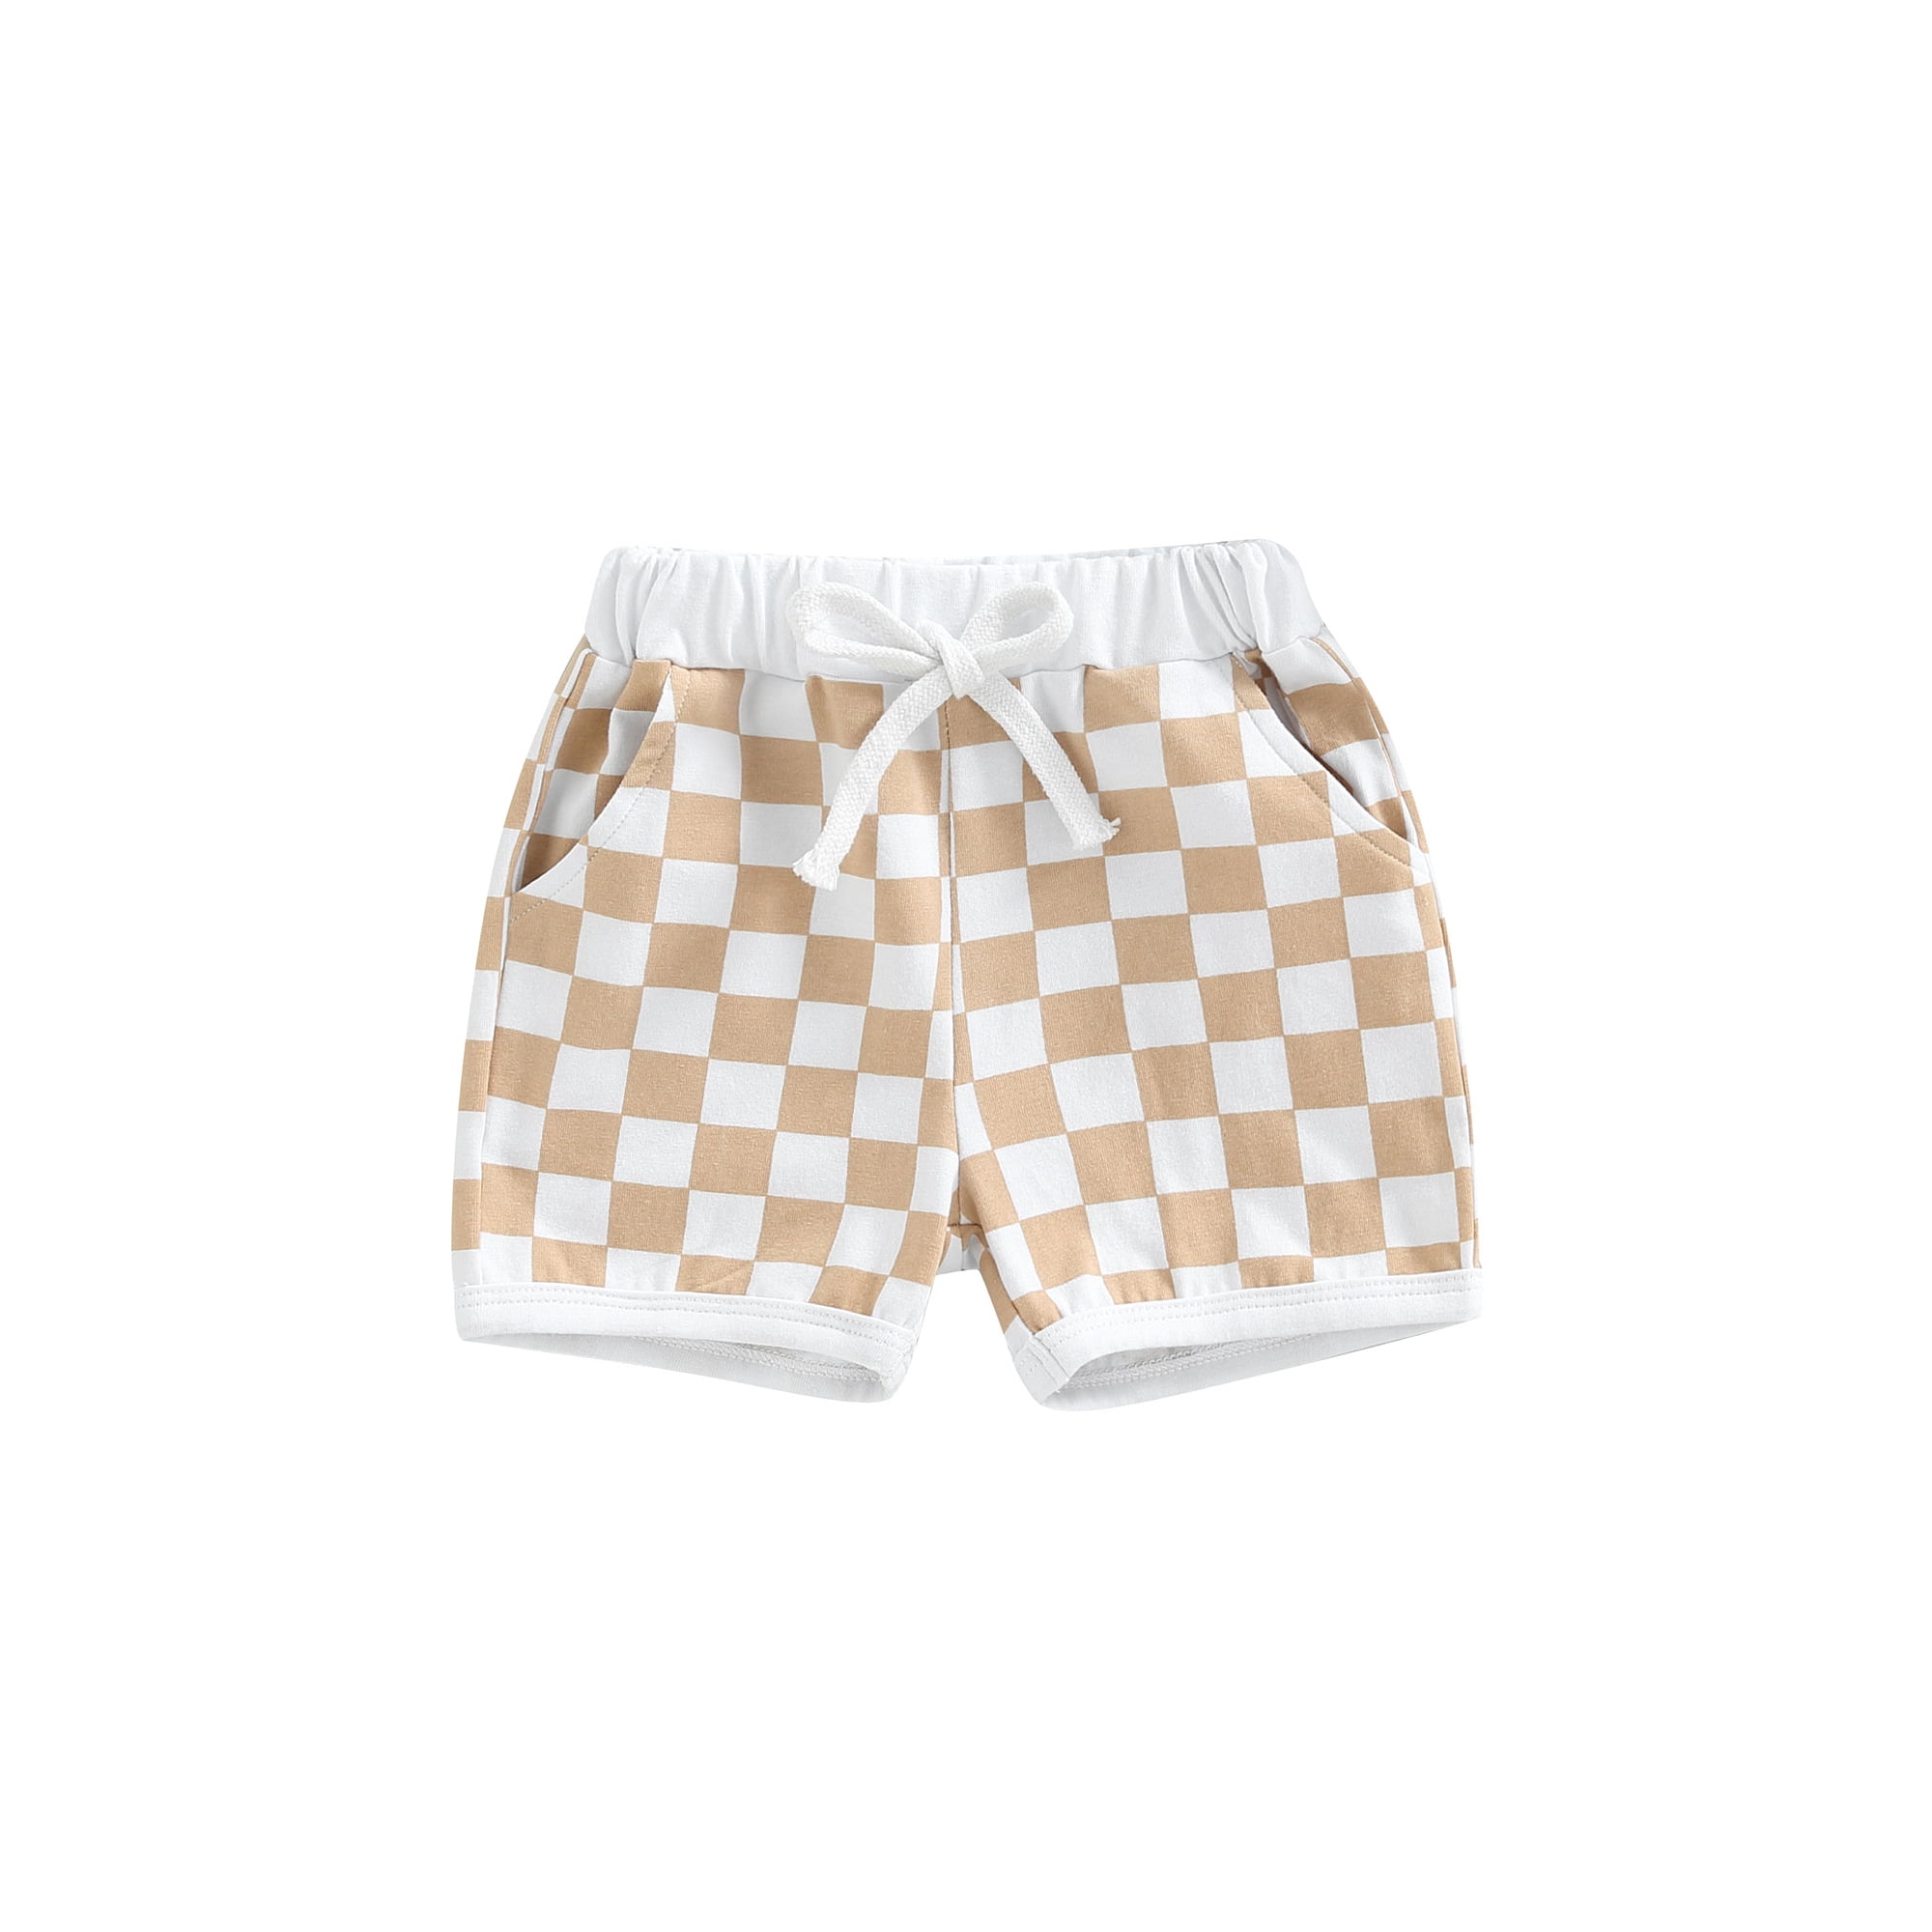 Calsunbaby Kids Toddler Baby Boys Shorts with Checkerboard Print, Elastic Waist Drawstring Casual Pocket Shorts Clothes Yellow 18-24 Months, Infant